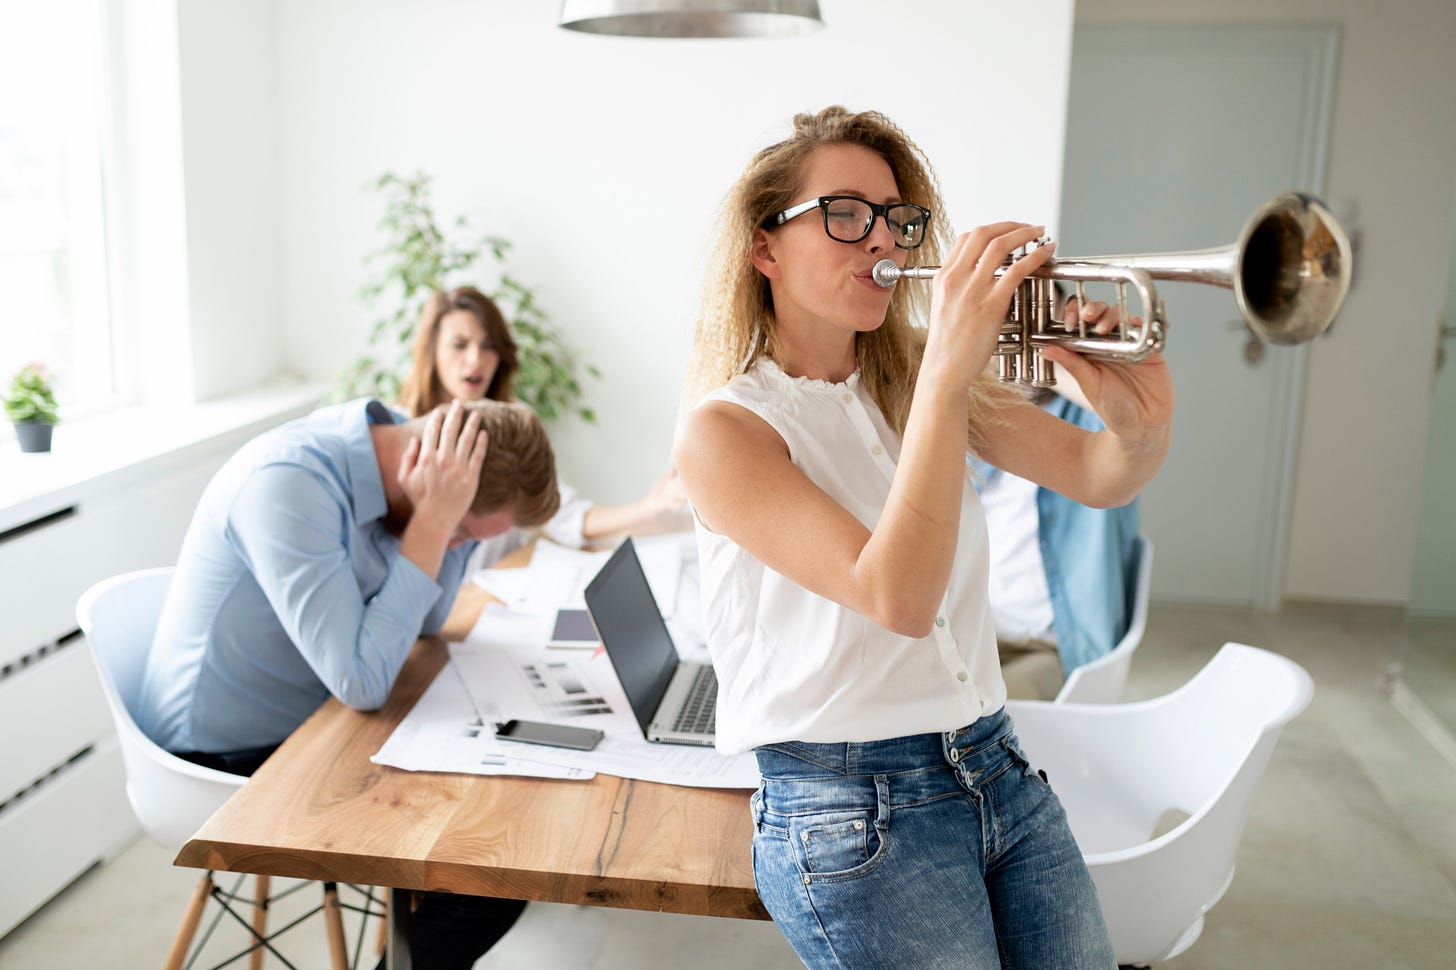 A friend plays a loud horn obnoxiously while her other friends have a business meeting.